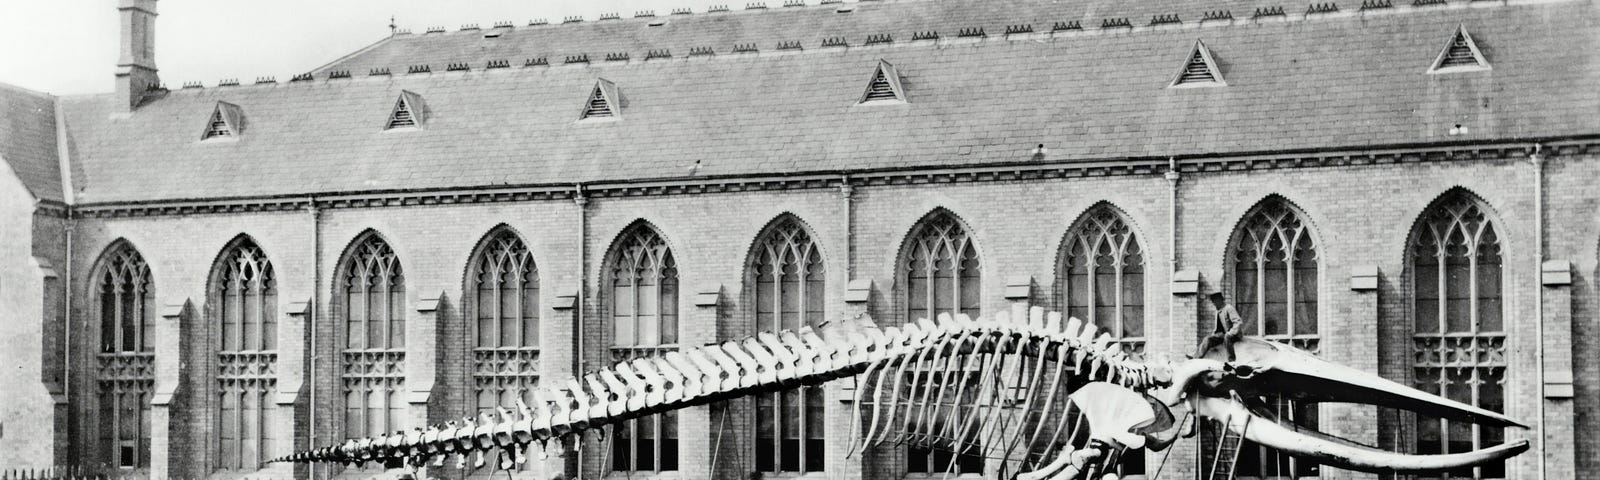 Black and white photograph of a whale skeleton in outdoor setting next to a large building.